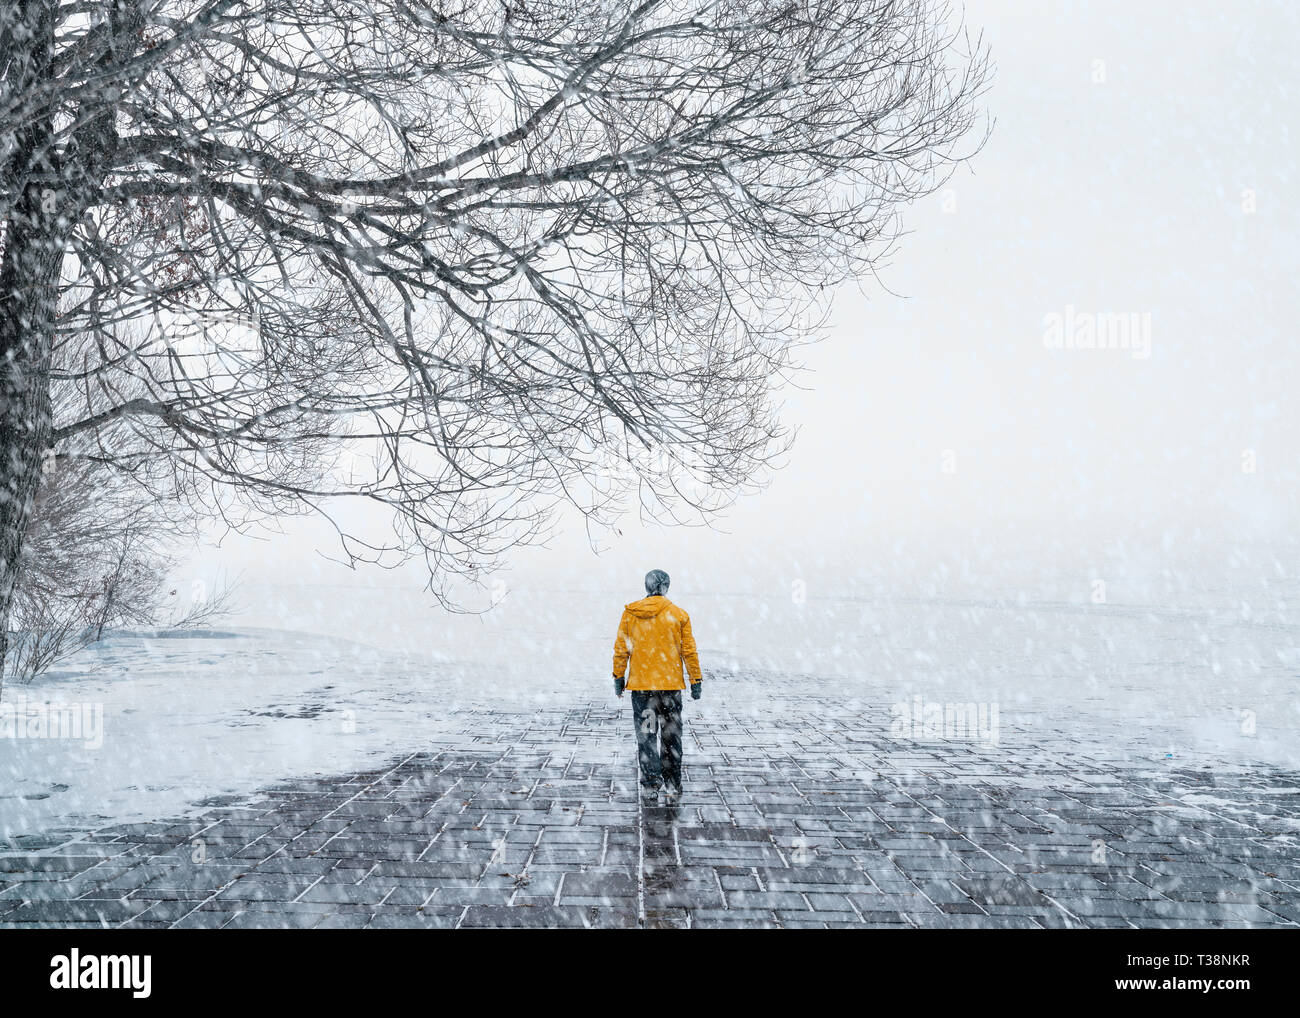 A man in a yellow coat walking on the snow-covered road Stock Photo